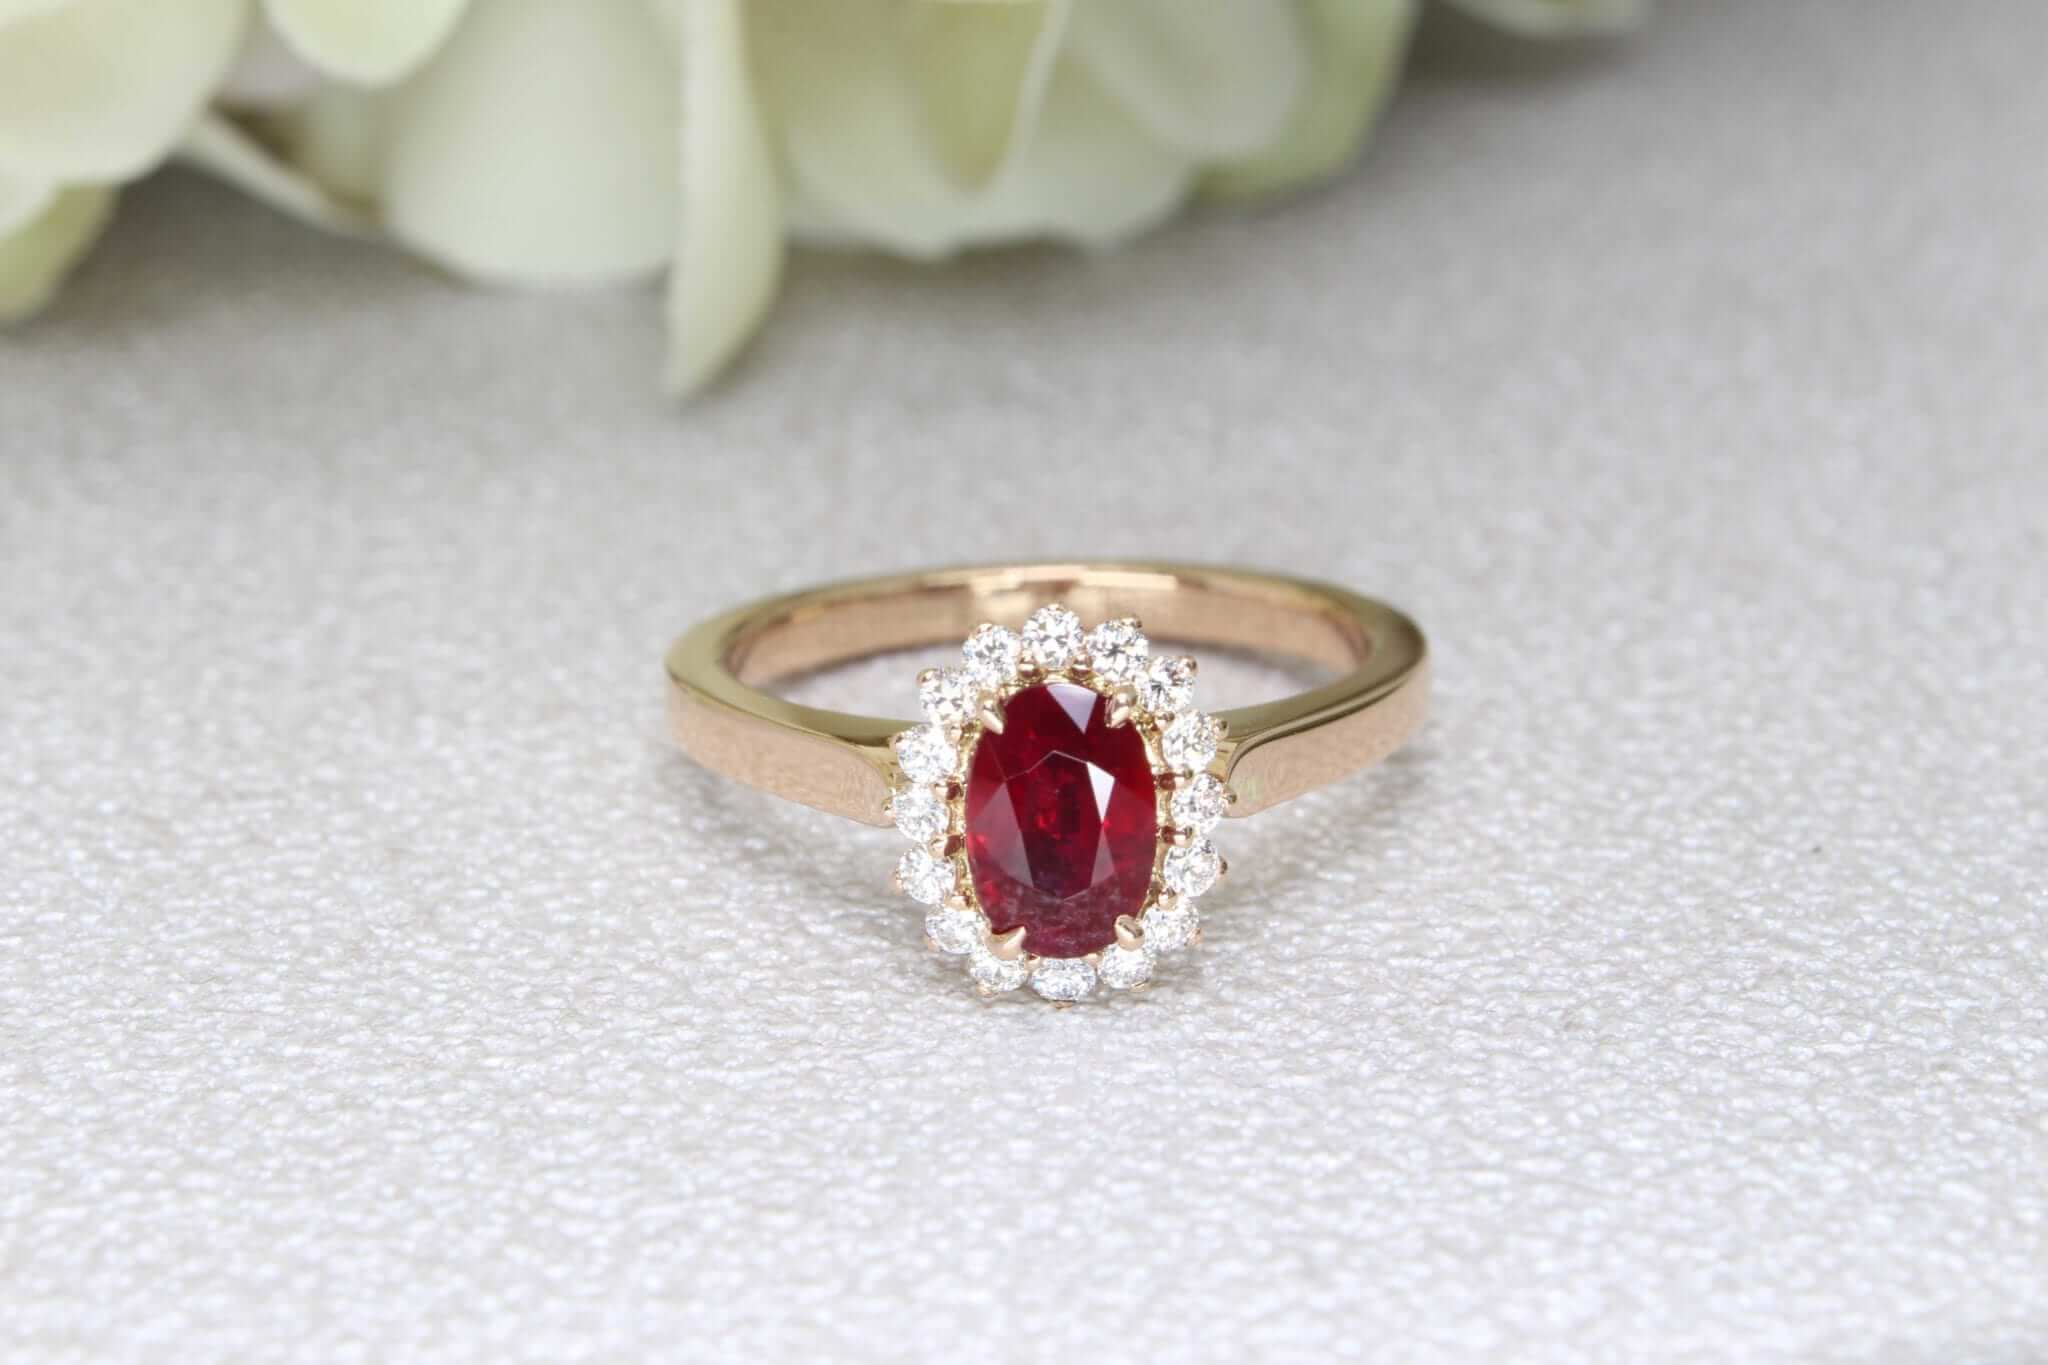 Vivid Red Ruby Gemstone Ring - Ruby gemstone source directly from Mozambique to Burma, known for its quality and high saturated colour. Singapore Customised Jeweller in heated and unheated ruby gemstone jewellery and ring for wedding jewellery and engagement ring